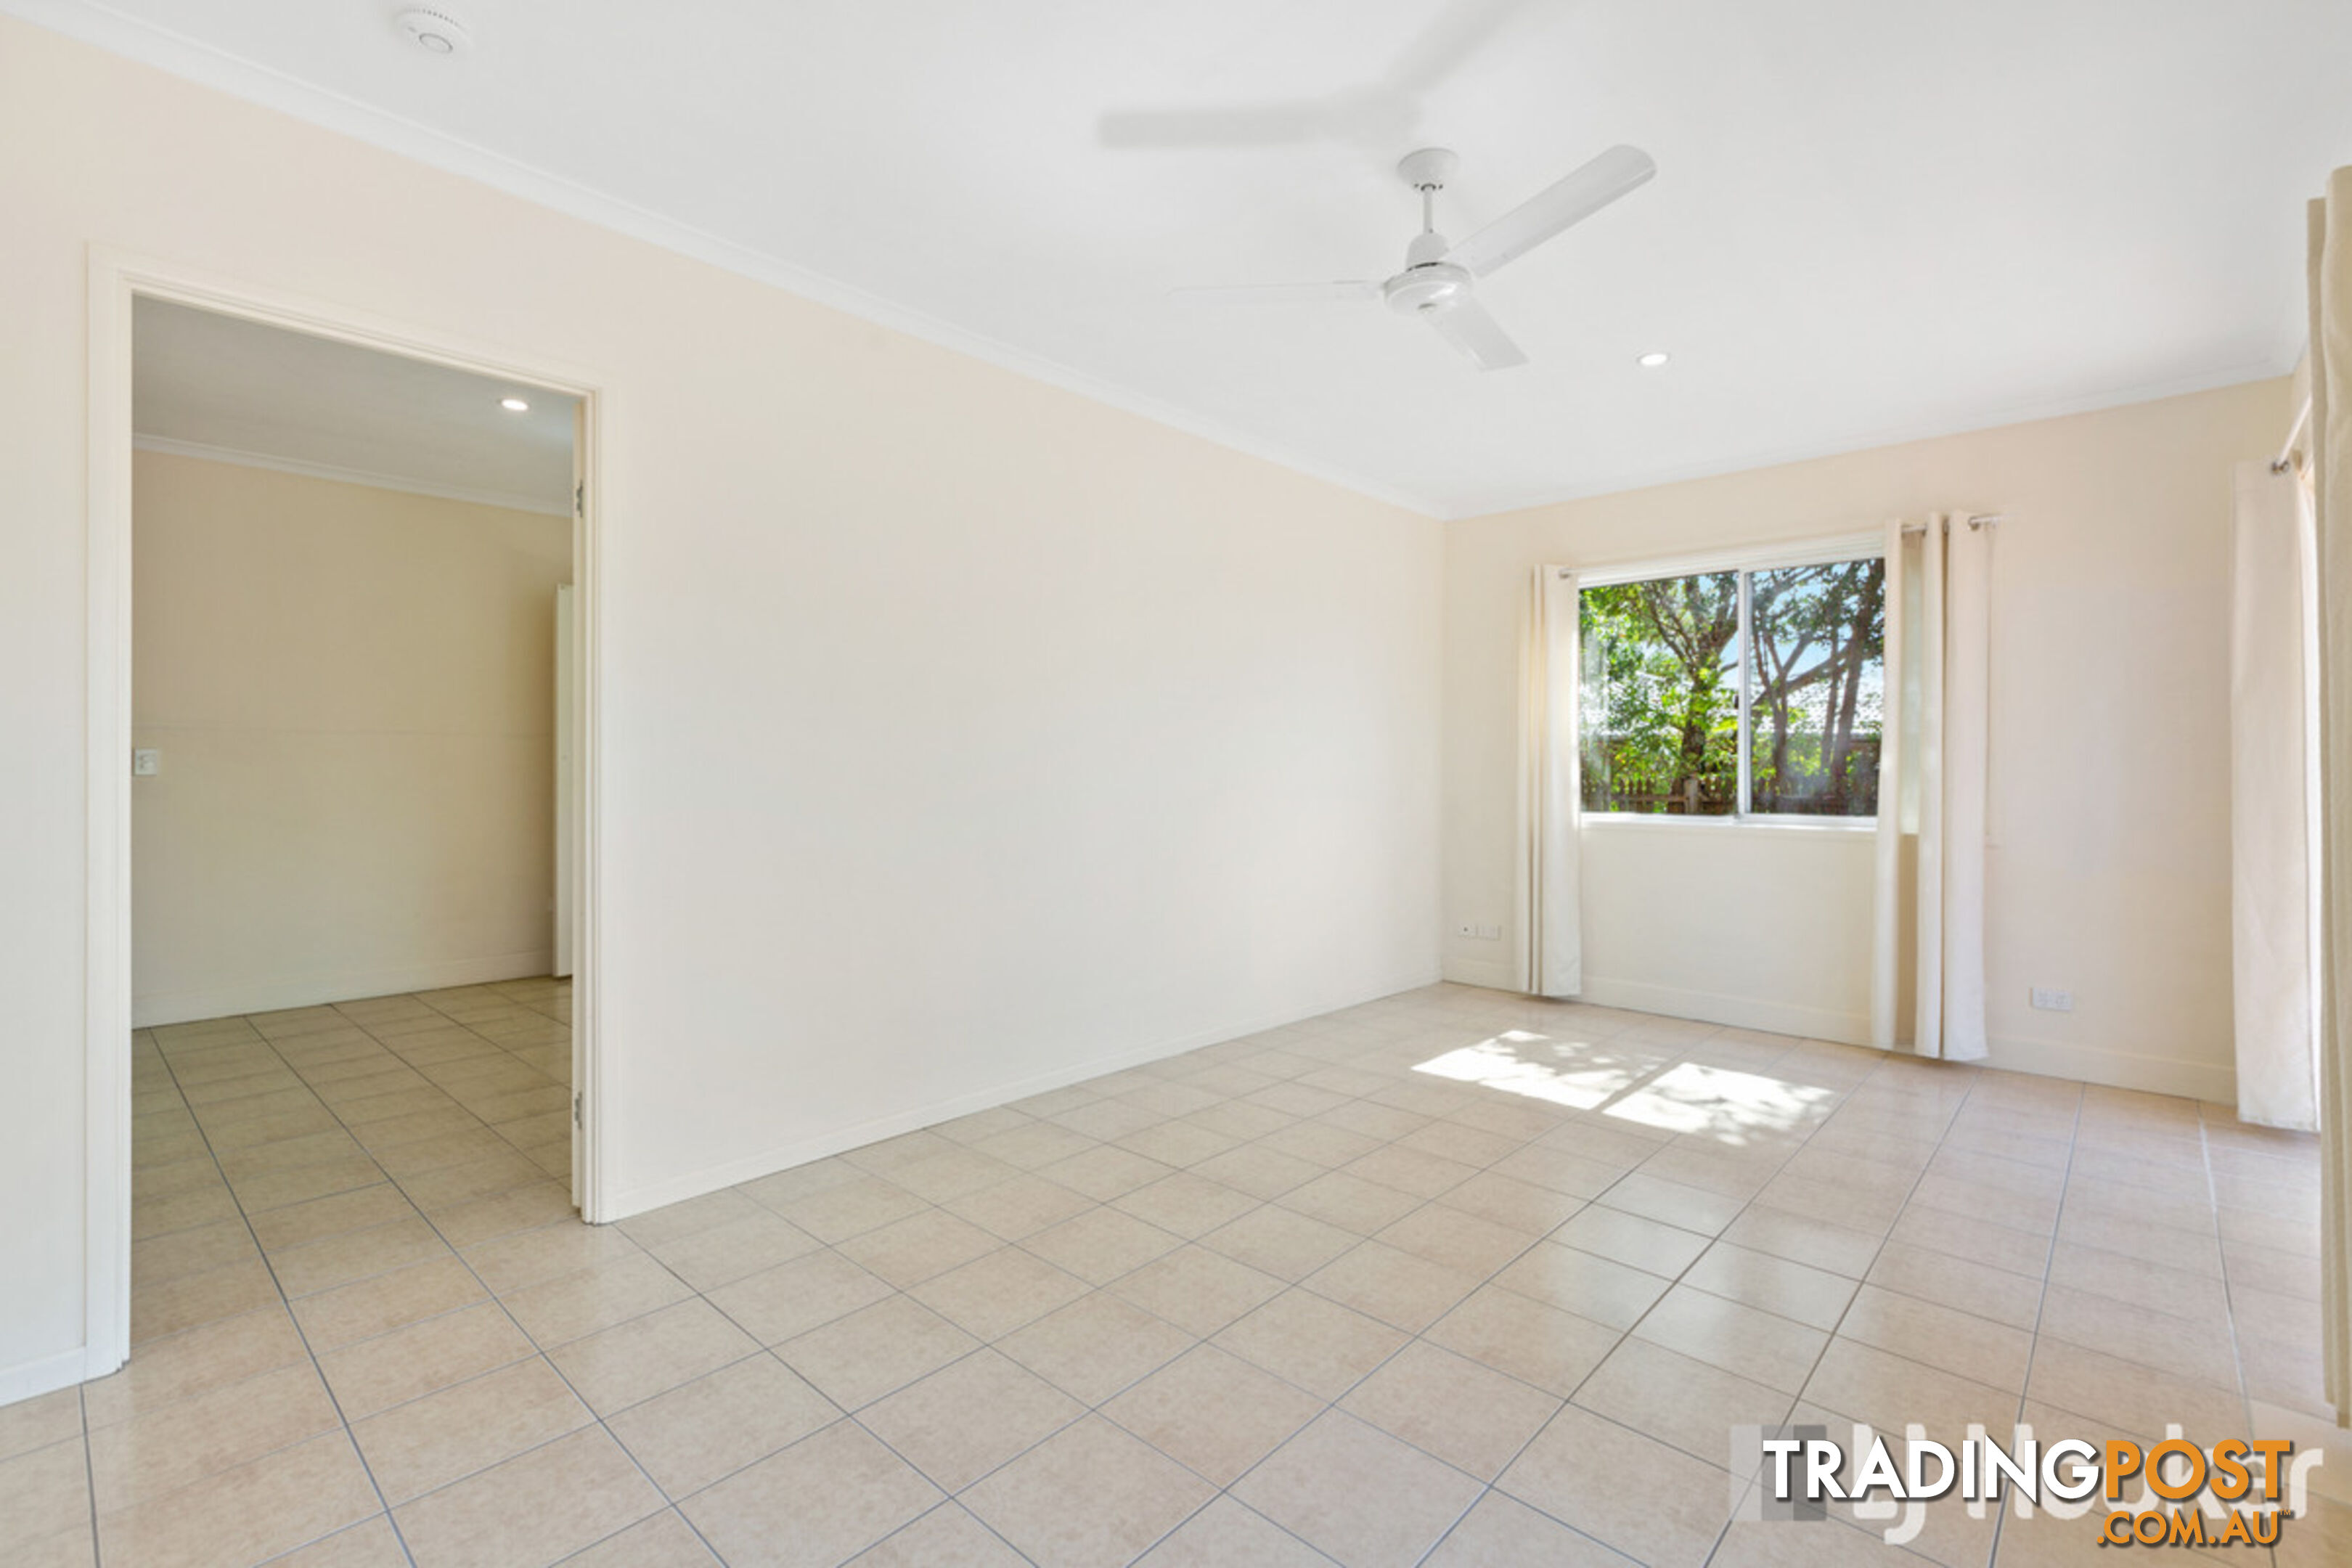 9 Commodore Court CLEVELAND QLD 4163